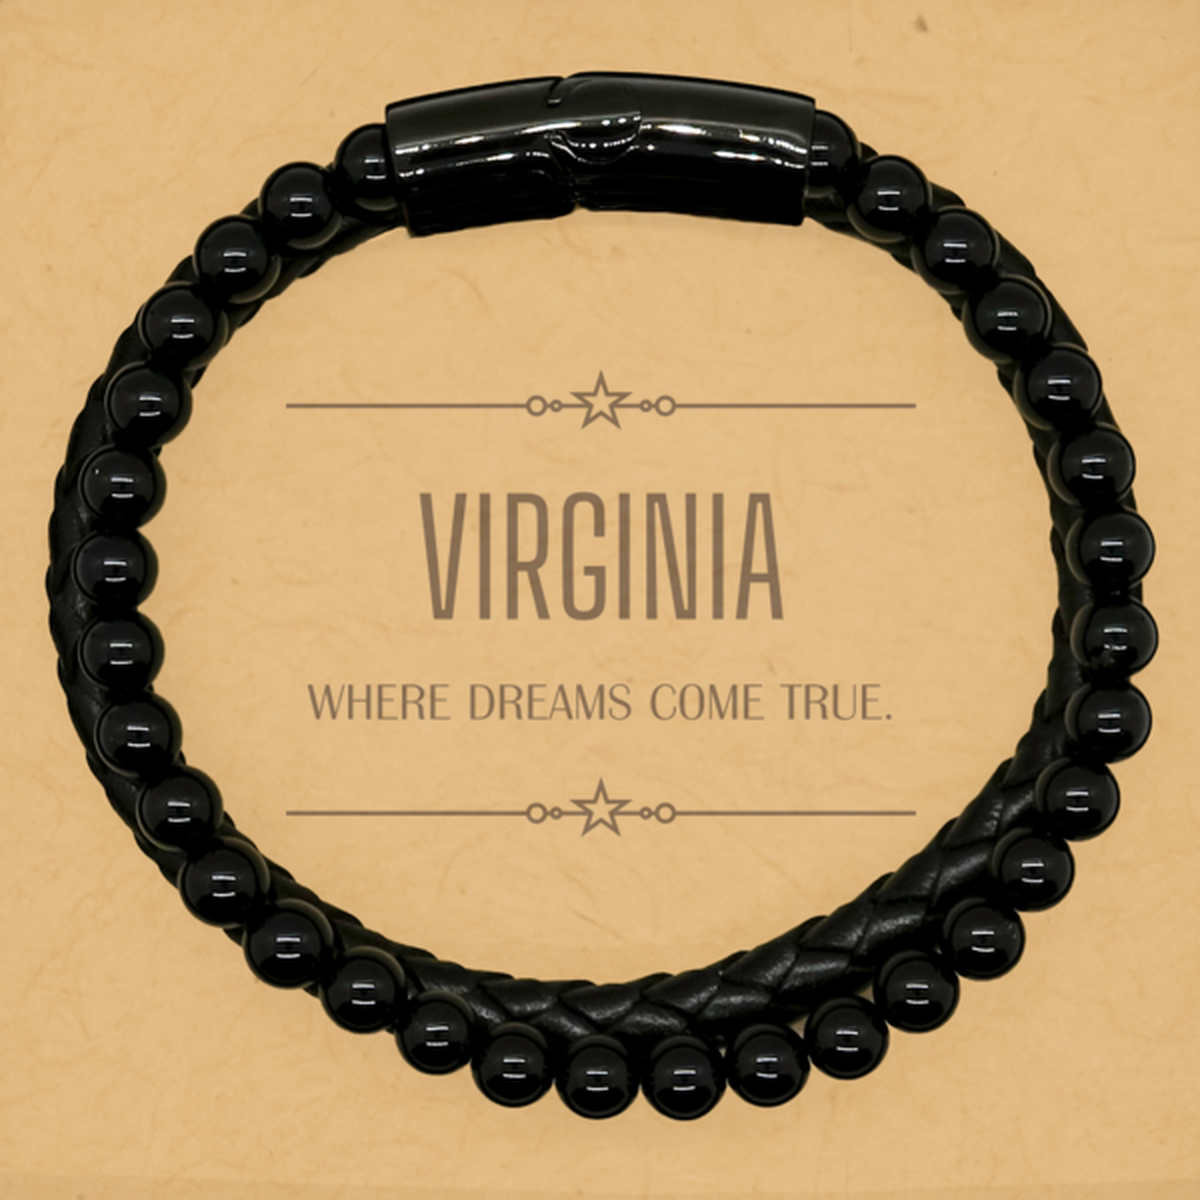 Love Virginia State Stone Leather Bracelets, Virginia Where dreams come true, Birthday Inspirational Gifts For Virginia Men, Women, Friends